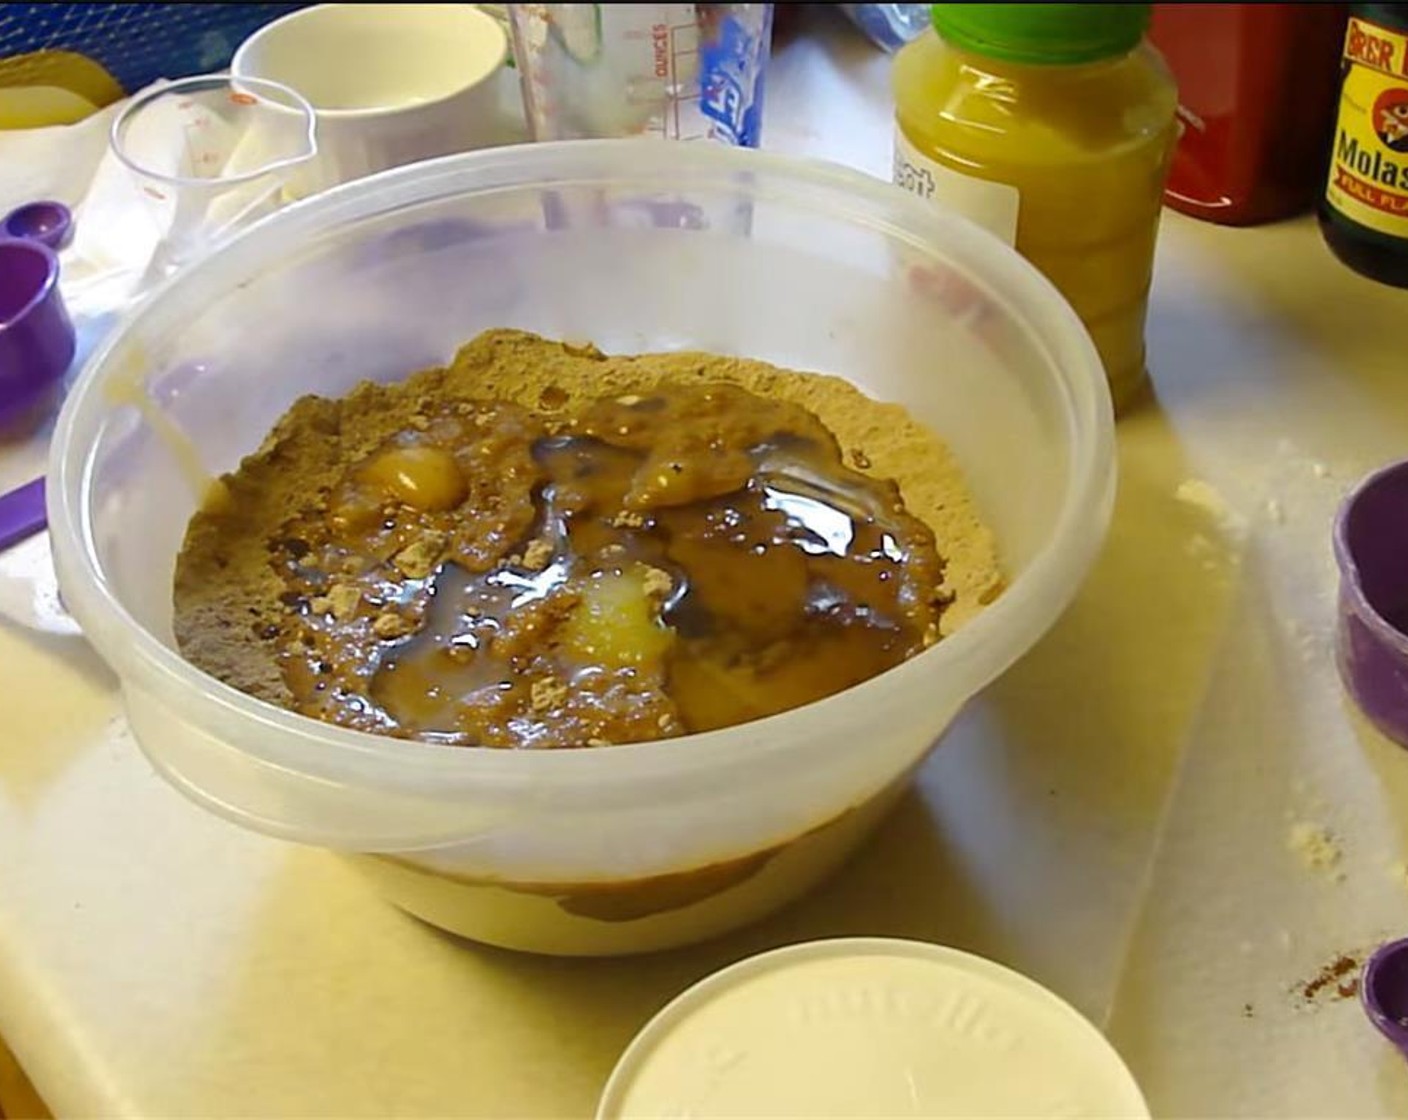 step 3 Pour in Water (1 cup), Apple Sauce (1/4 cup), and Canola Oil (1/2 cup).  Mix until well blended. Spread evenly in a greased 9x13 inch baking pan.